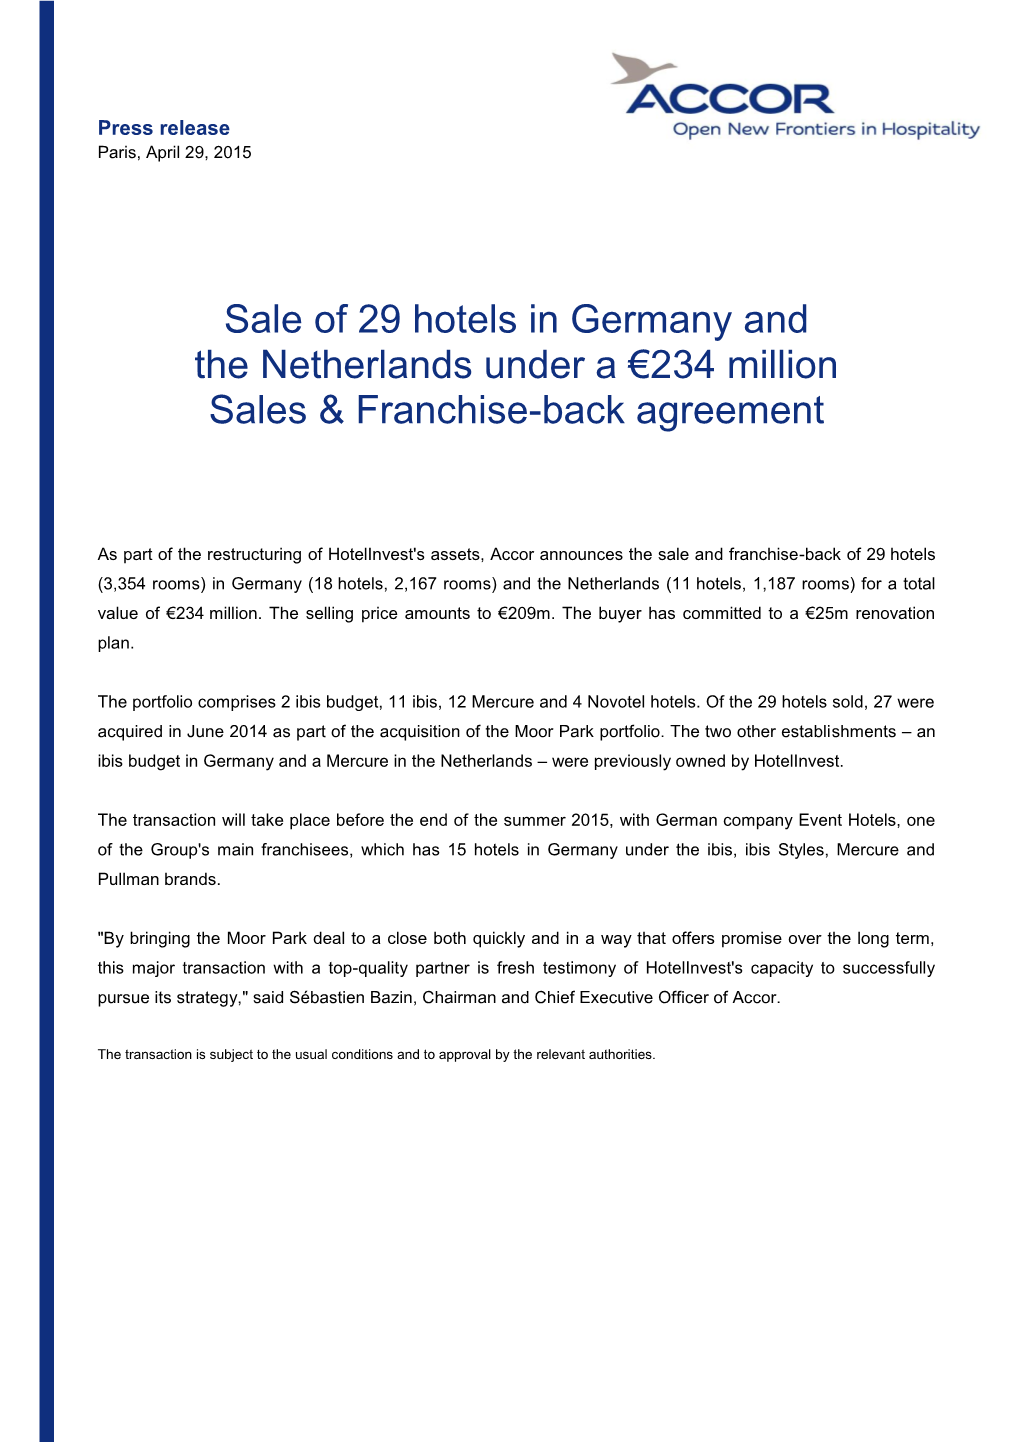 Sale of 29 Hotels in Germany and the Netherlands Under a €234 Million Sales & Franchise-Back Agreement